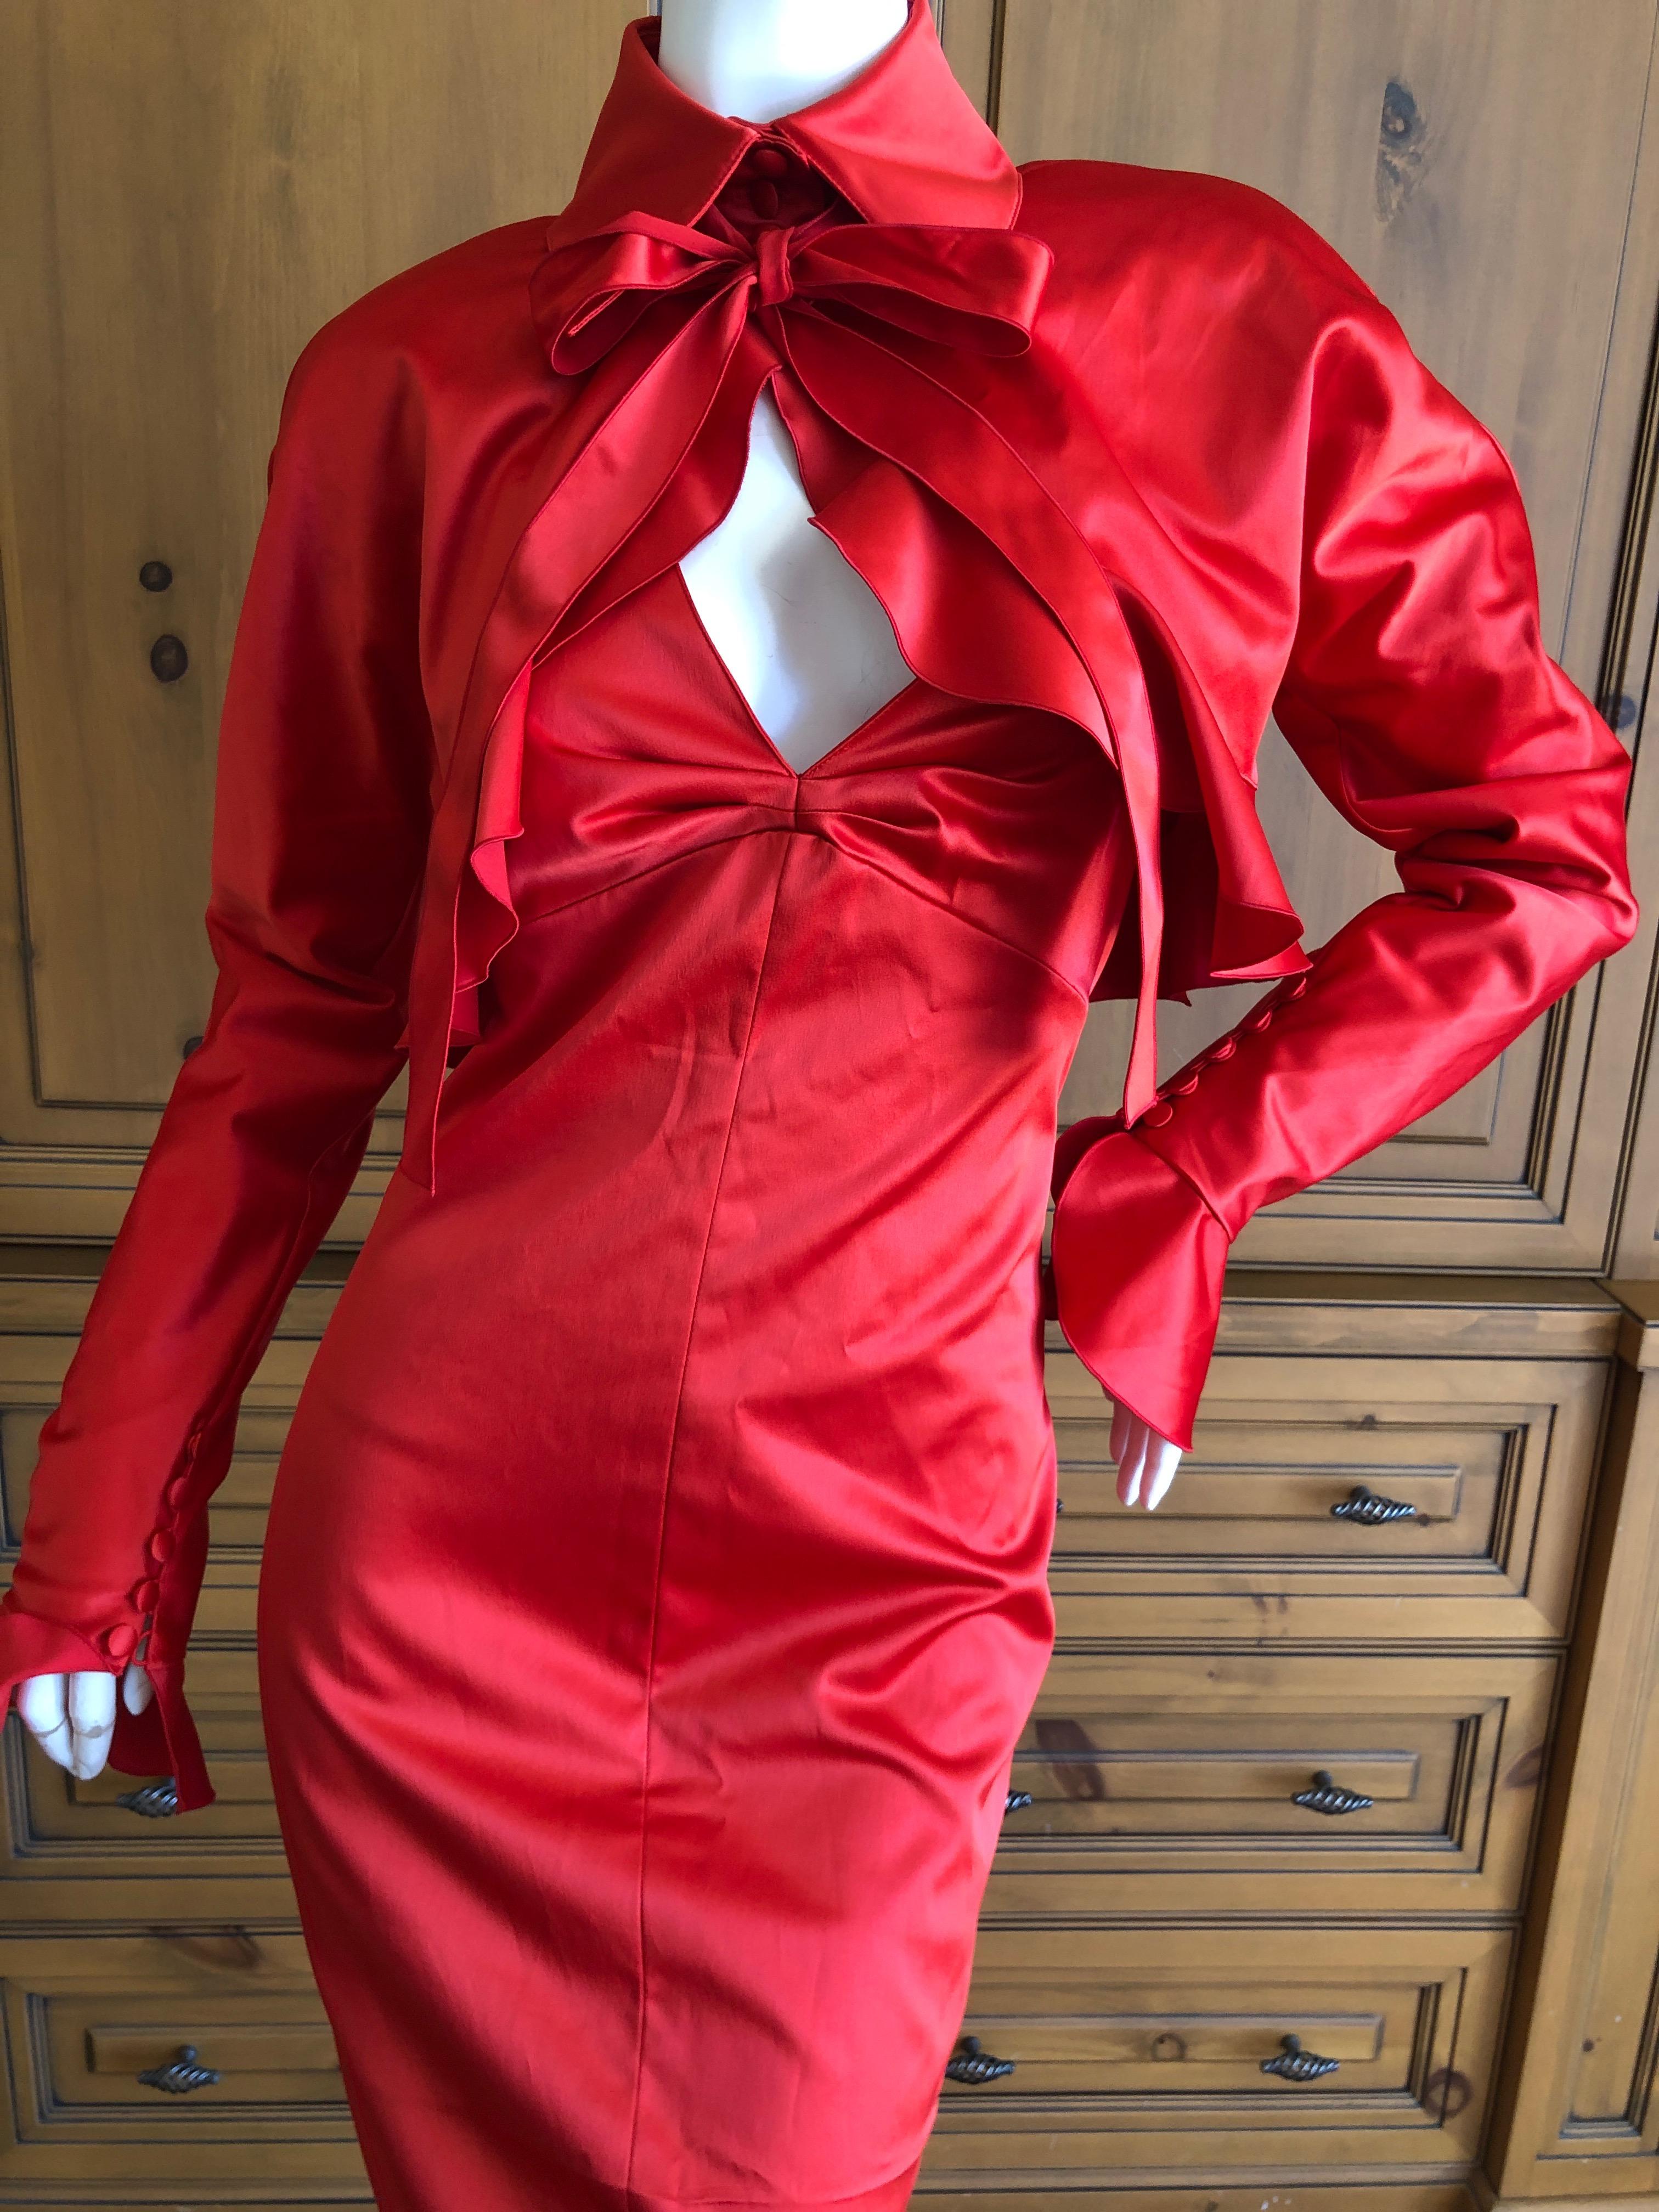 Karl Lagerfeld 1980's Red Evening Dress with Matching Jacket Lagerfeld Gallery 4